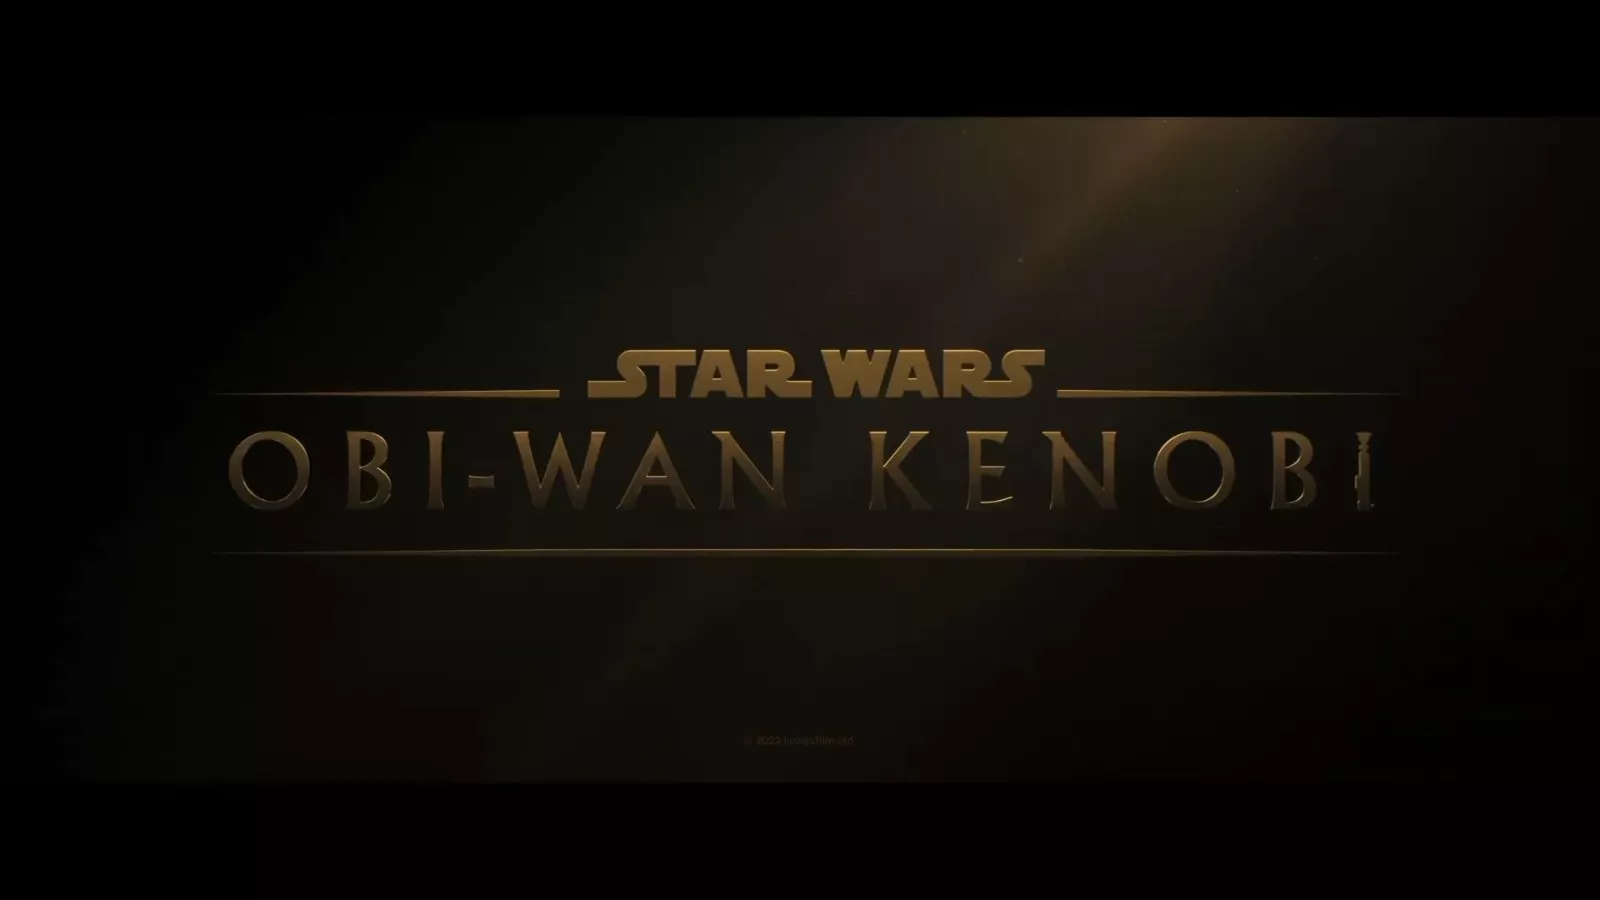 official preview of Star Wars derivative Obi Wan